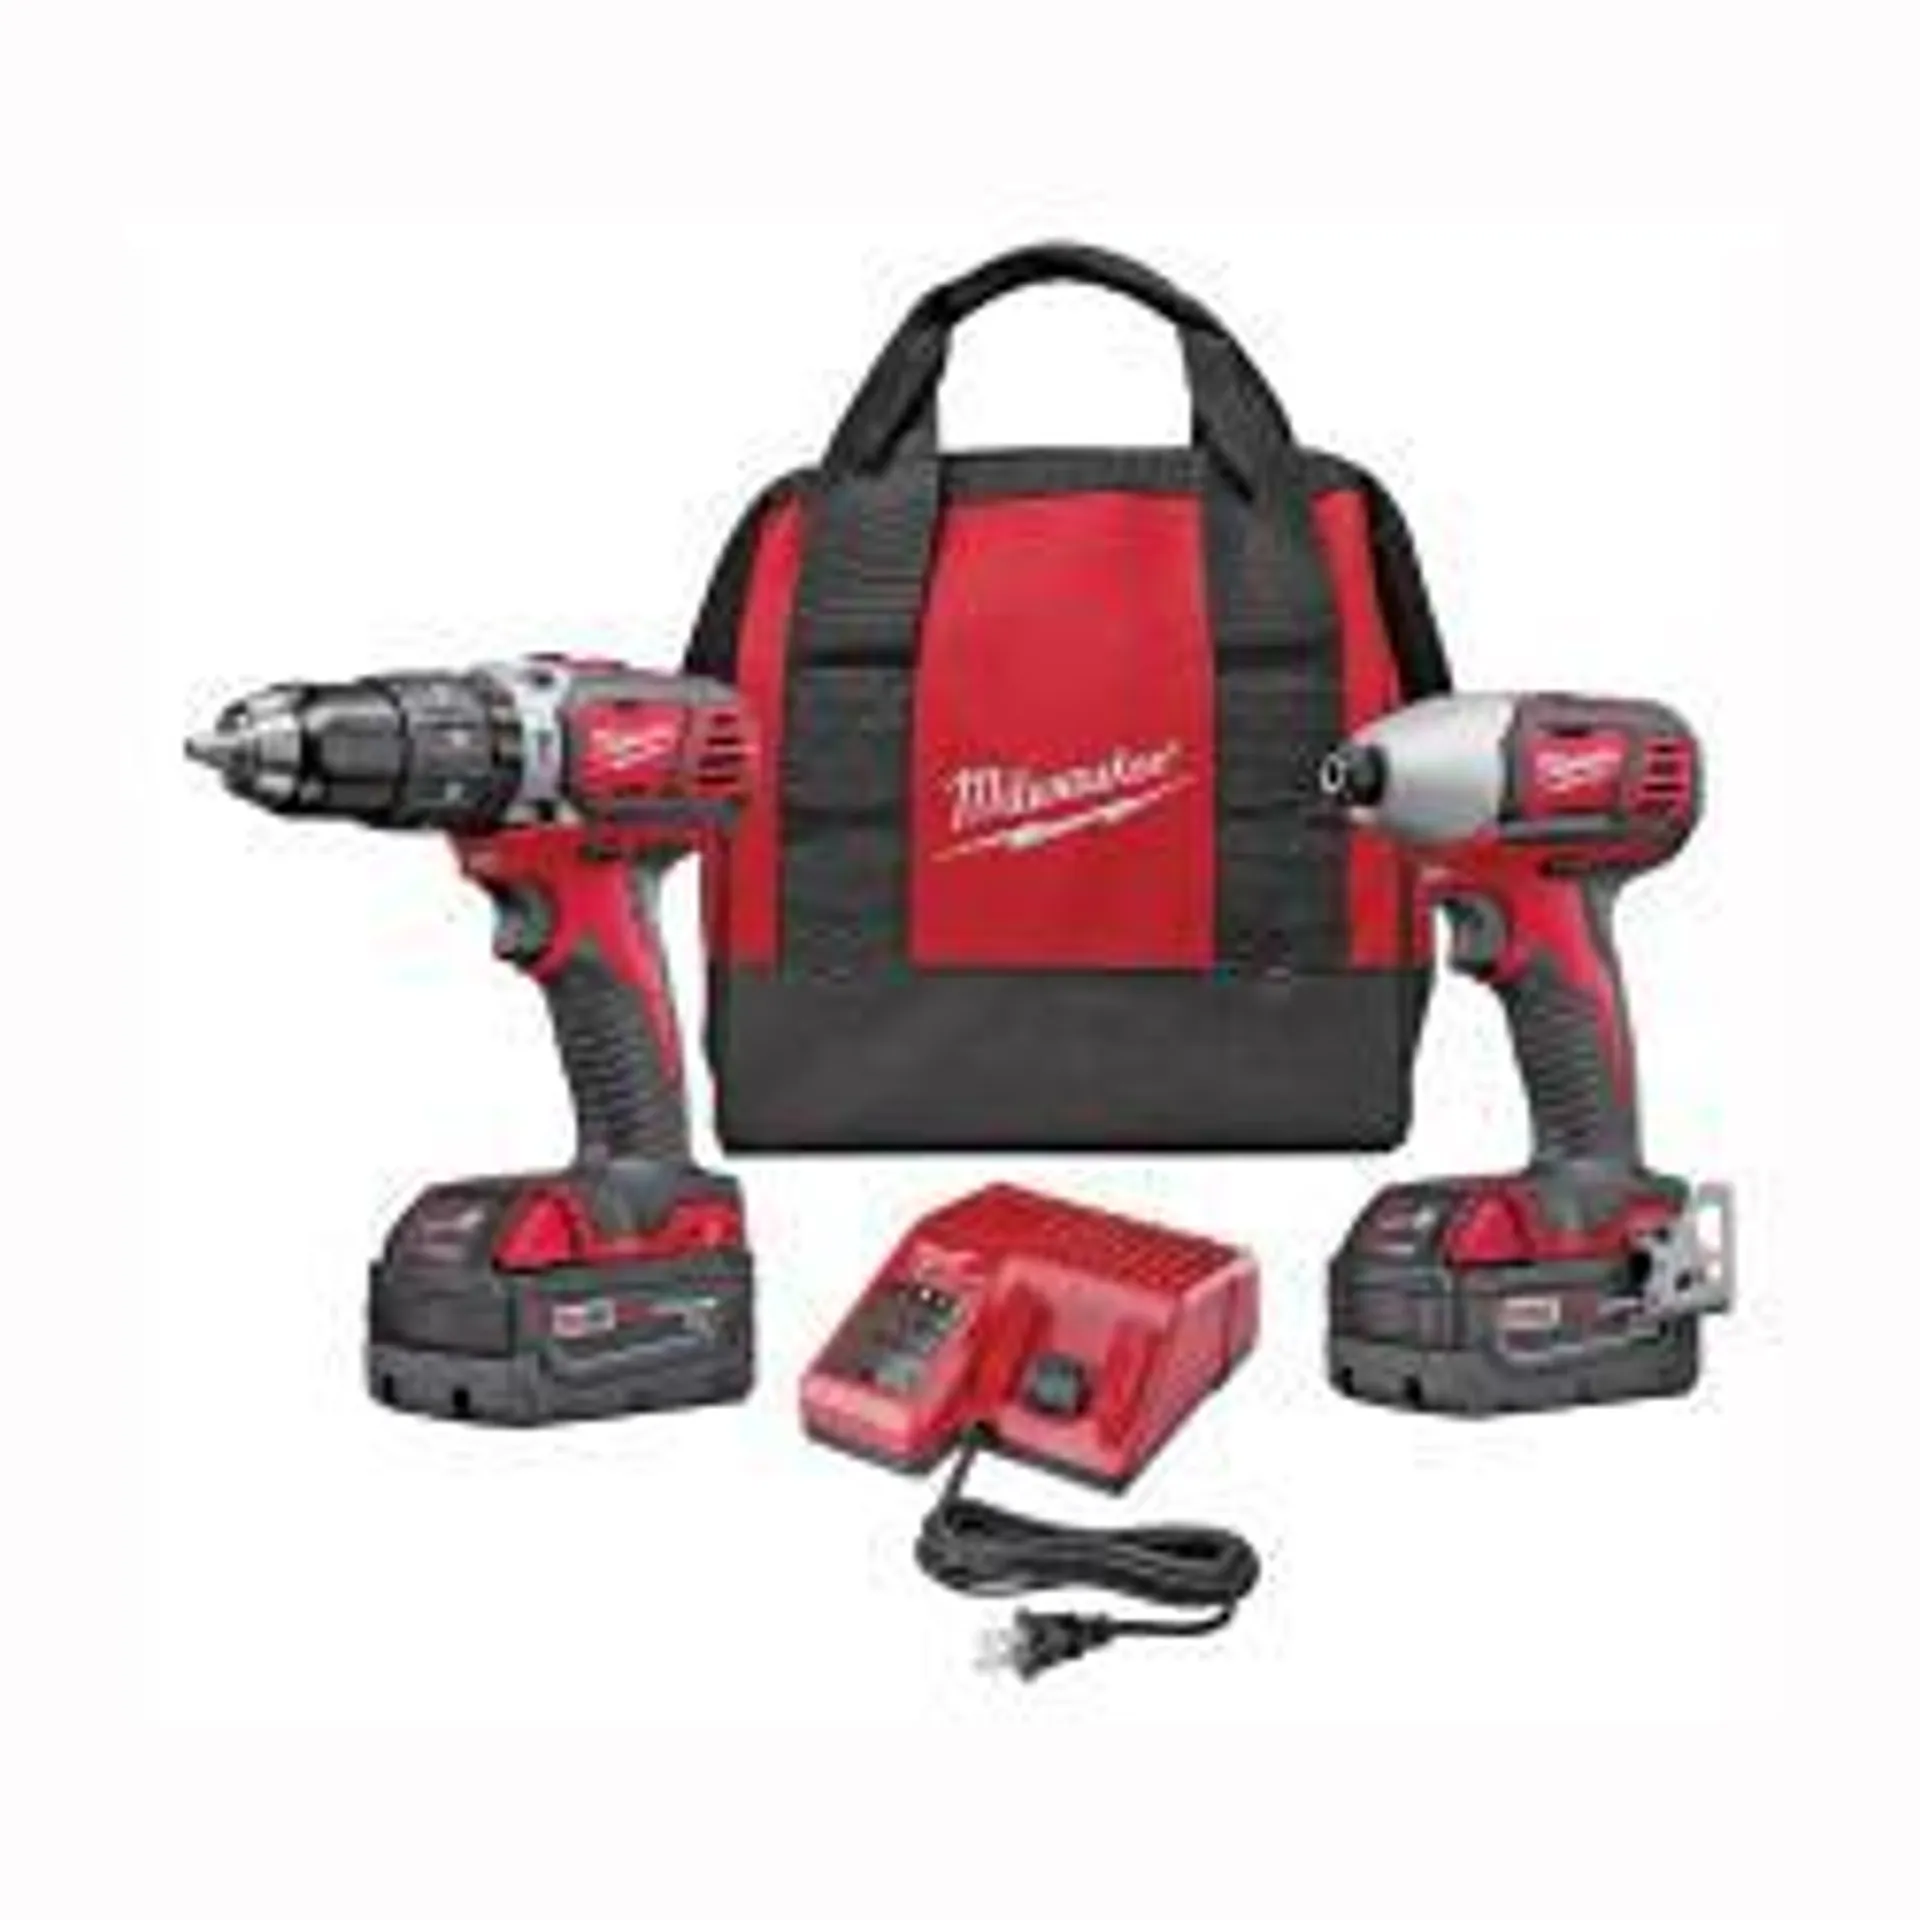 2697-22 Combination Tool Kit, Battery Included, 2.8 Ah, 18 V, Lithium-Ion